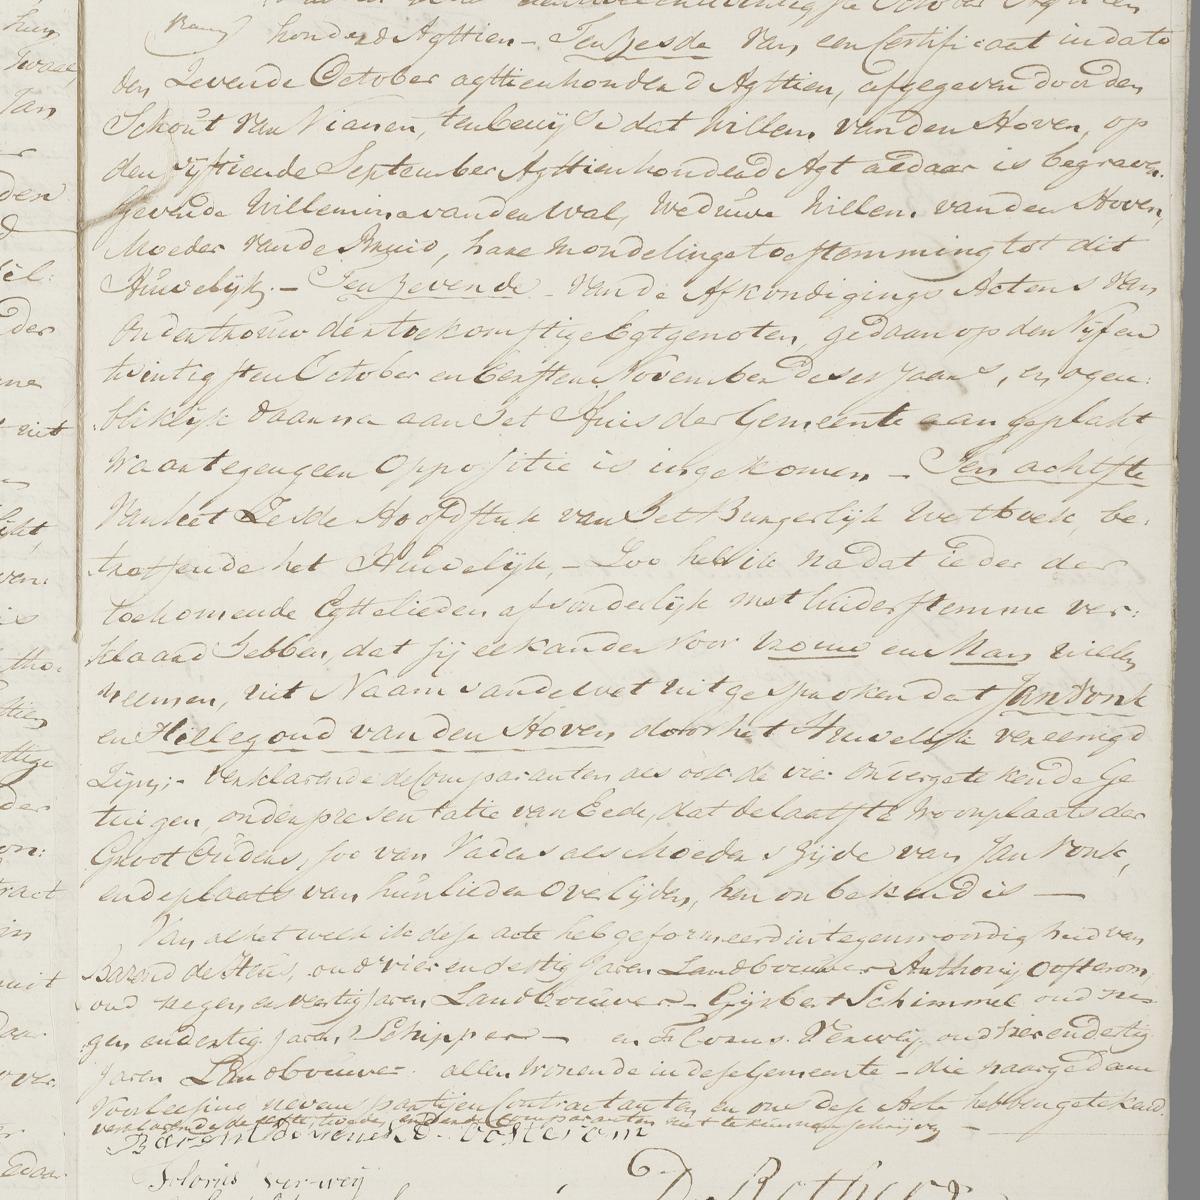 Civil registry of marriages, Tull en 't Waal, 1818, record 4-end